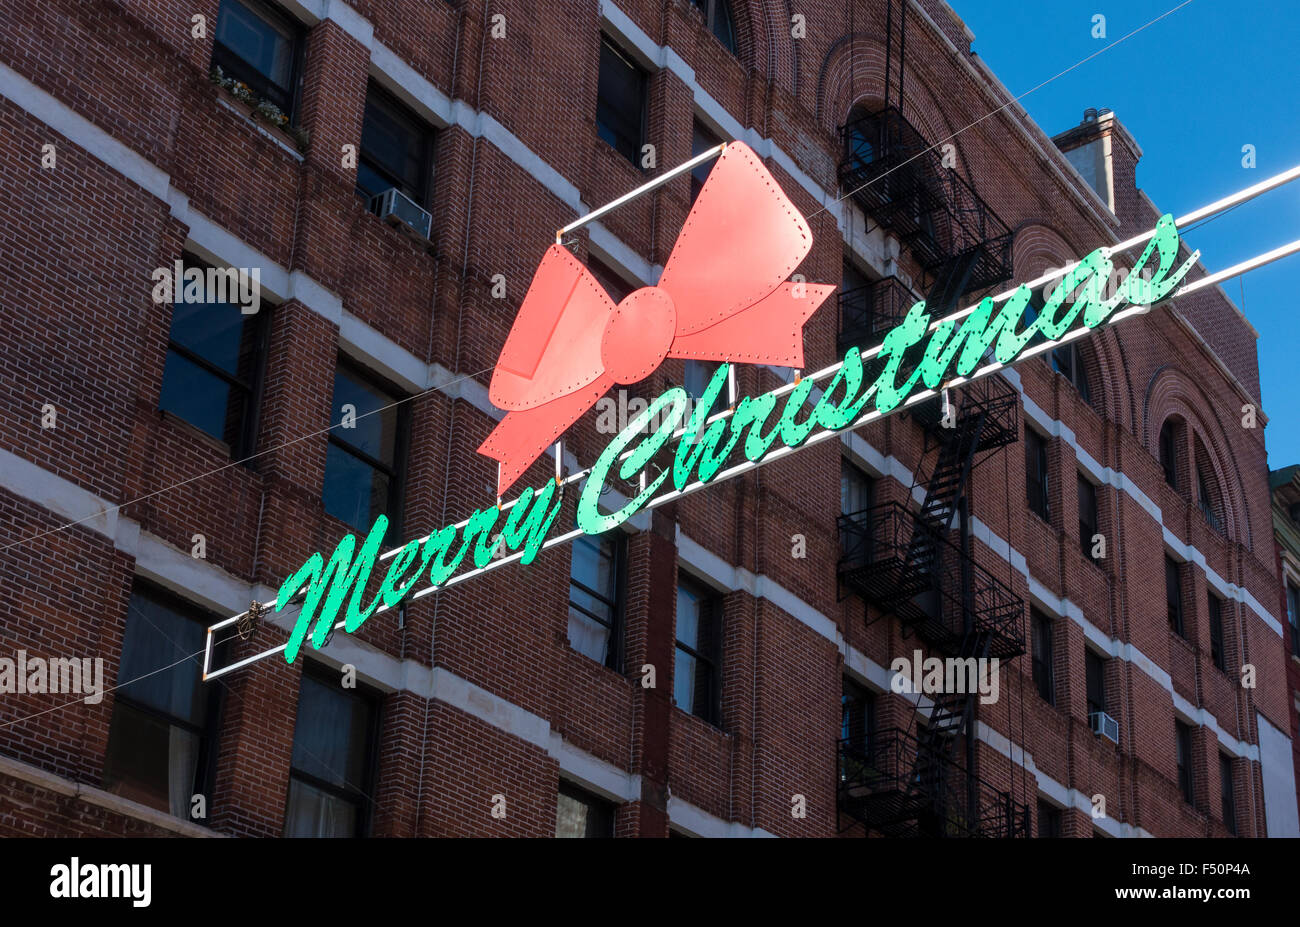 Merry Christmas banner across Mulberry Street in Little Italy in New York City Stock Image